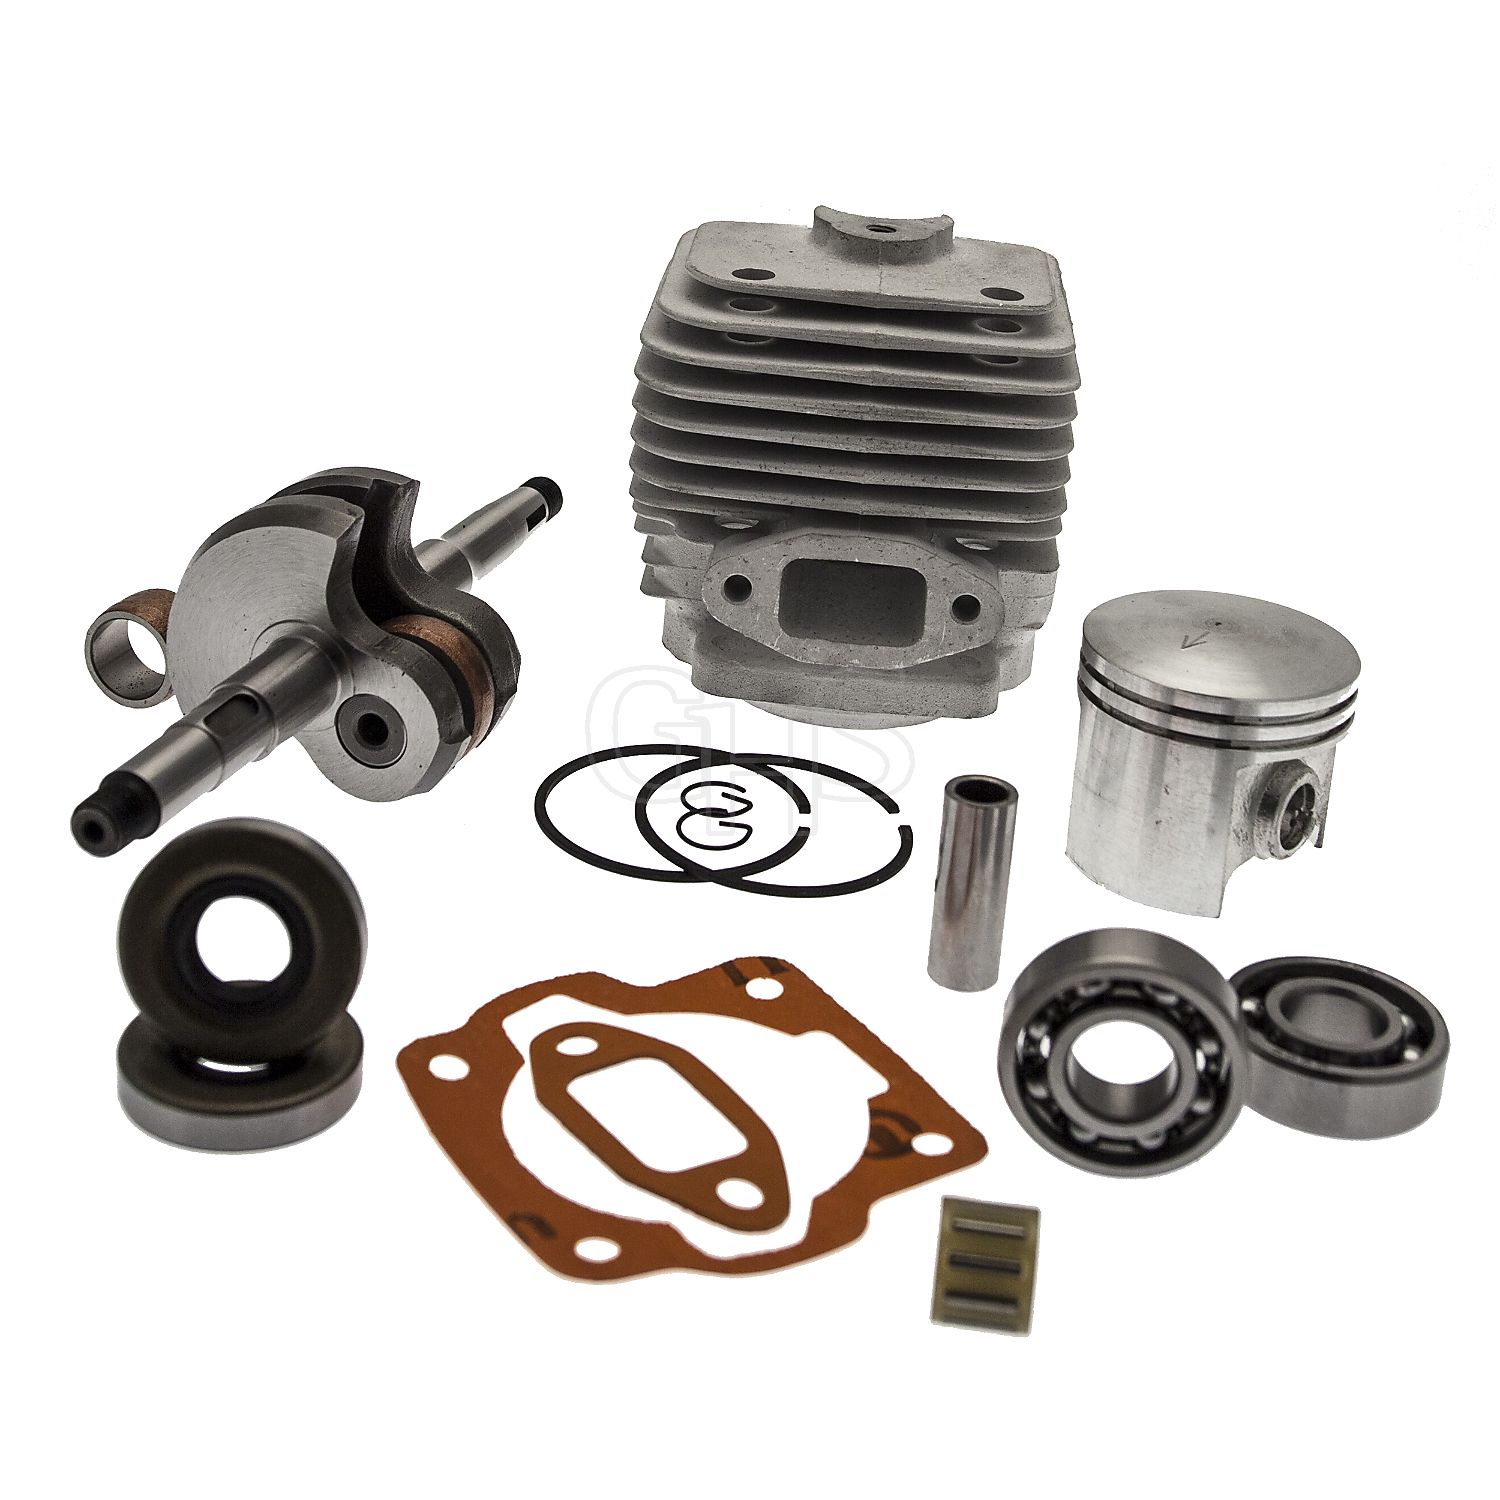 49MM Bore Cylinder Kit Overhaul with crankshaft For Stihl TS350 TS360 08S 